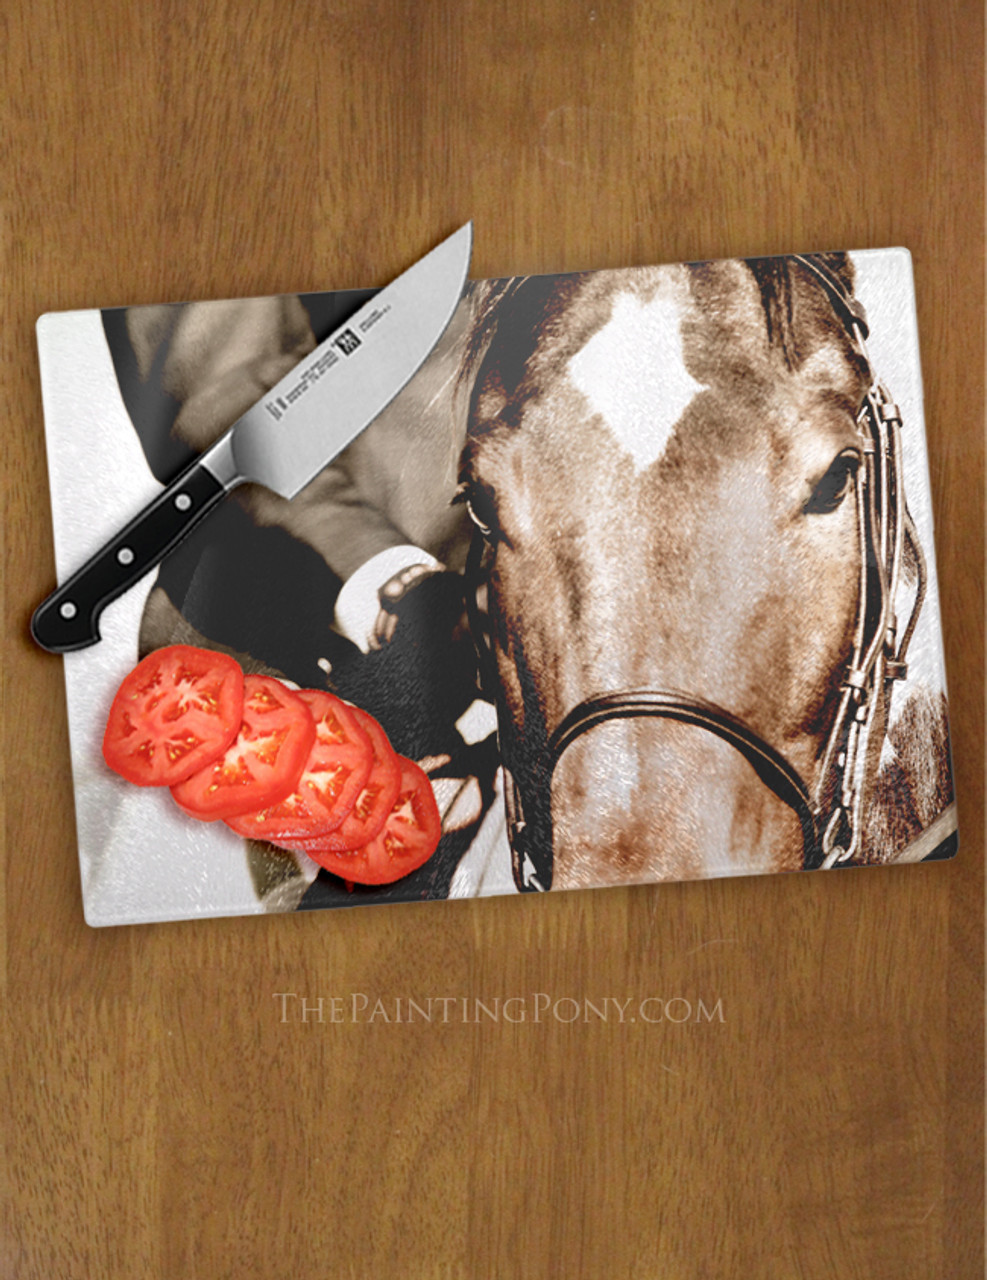 https://cdn11.bigcommerce.com/s-dthur0g/images/stencil/1280x1280/products/1289/10814/equestrian_show_horse_glass_cutting_board__69831.1523302224.jpg?c=2